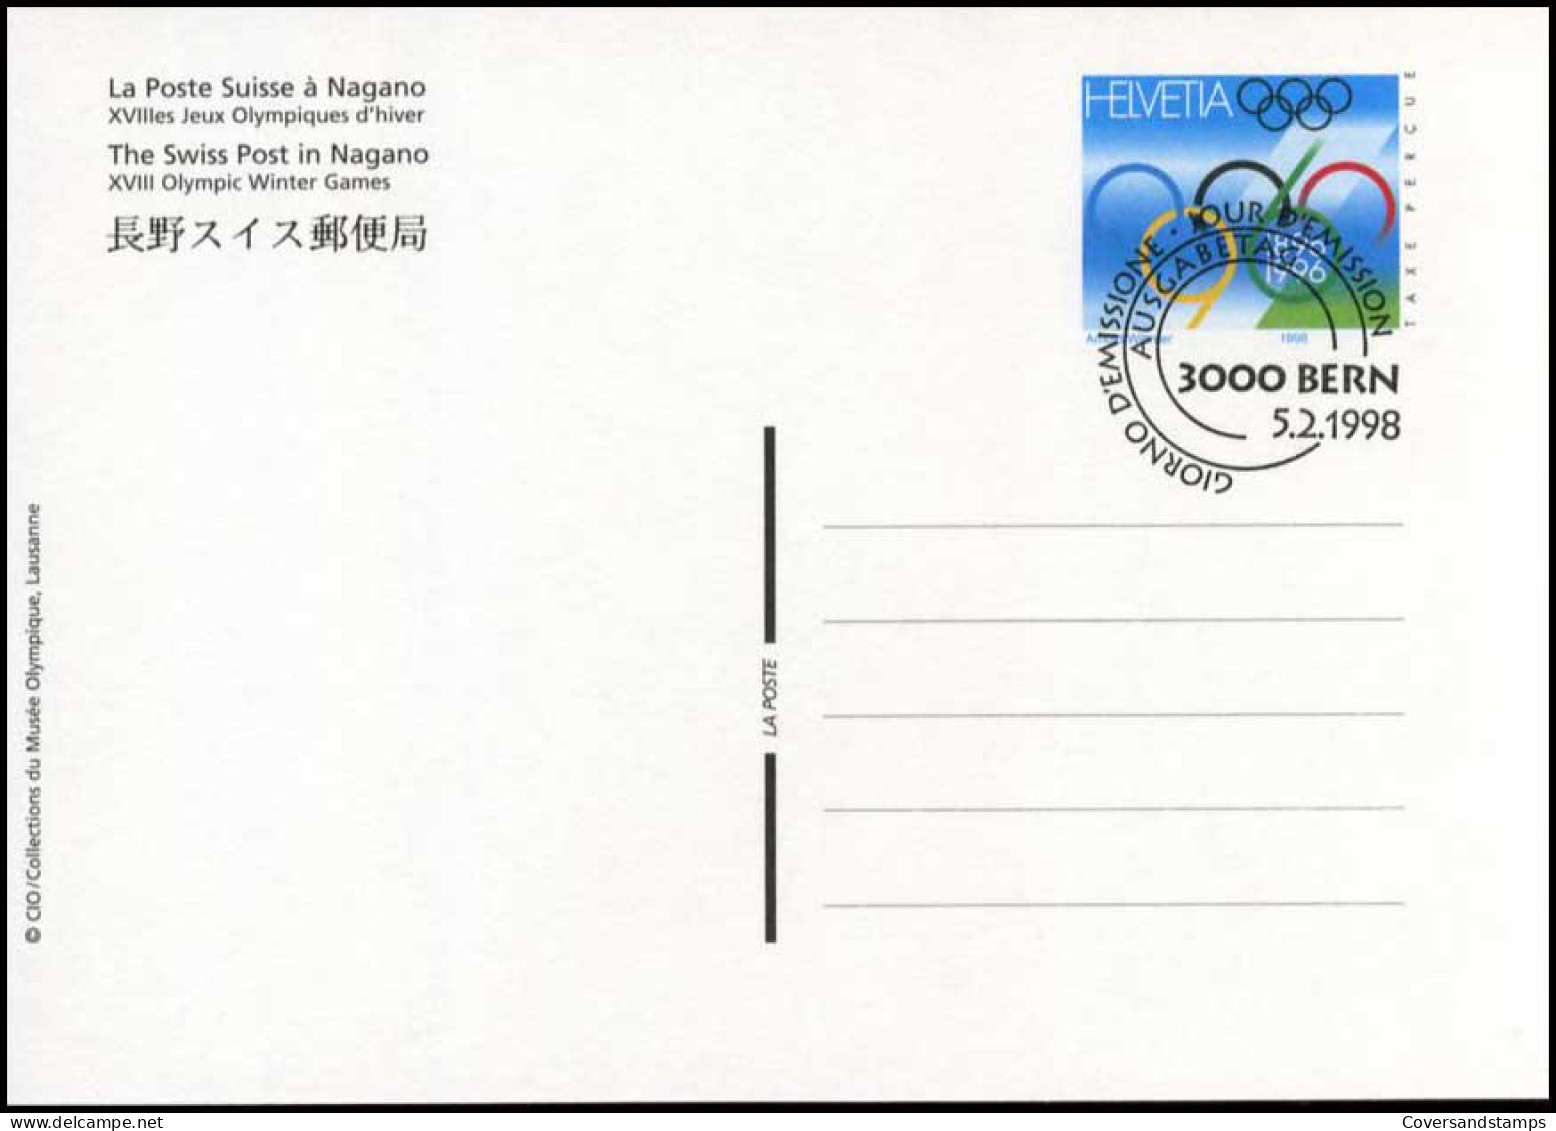  Zwitserland - MK -  Olympic Winter Games - Maximum Cards